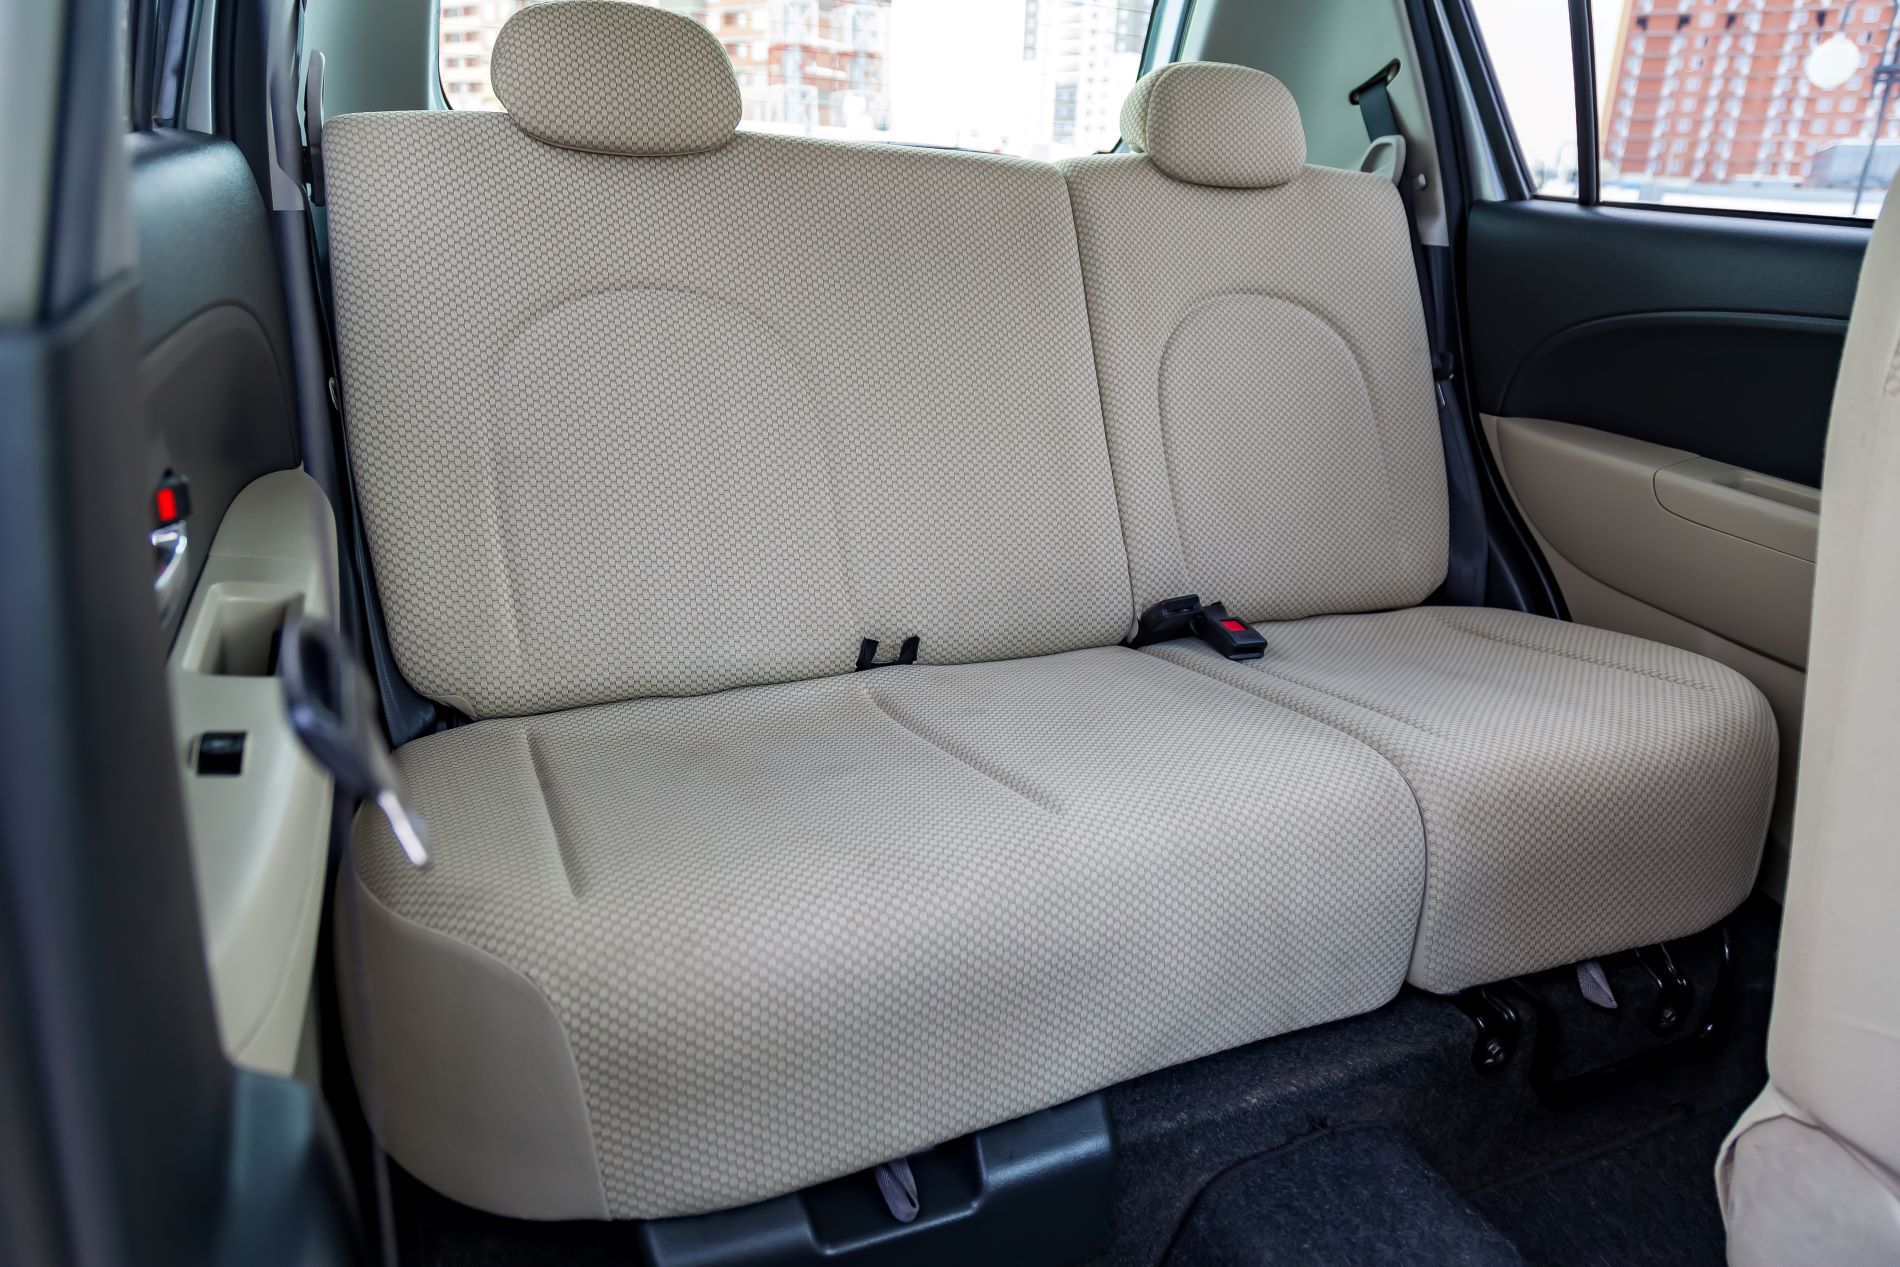 Cloth seats free of stains, no soda spills, a clean car interior, cleaning solutions has been applied to the stained area. 